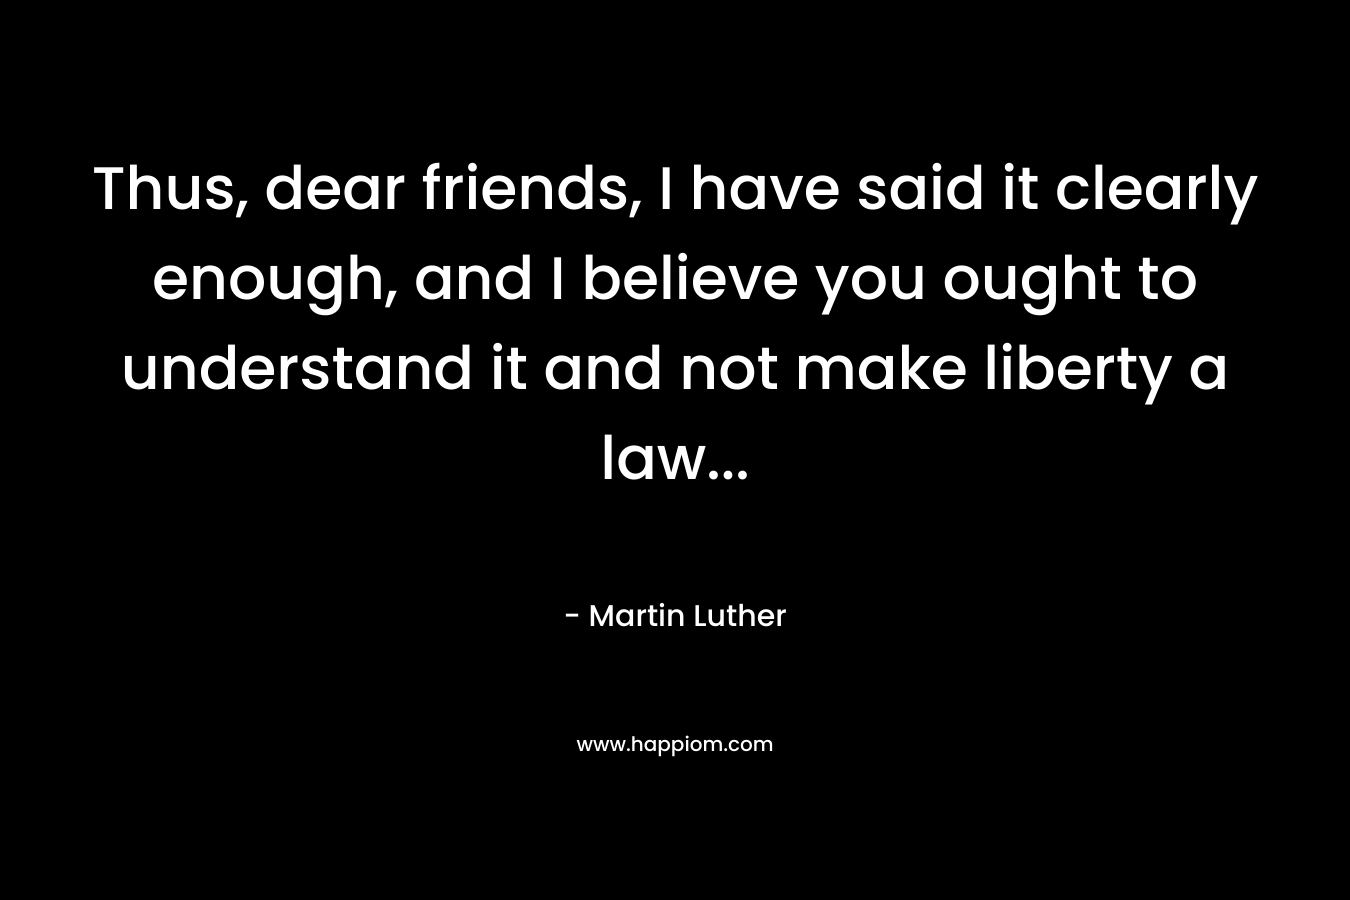 Thus, dear friends, I have said it clearly enough, and I believe you ought to understand it and not make liberty a law...